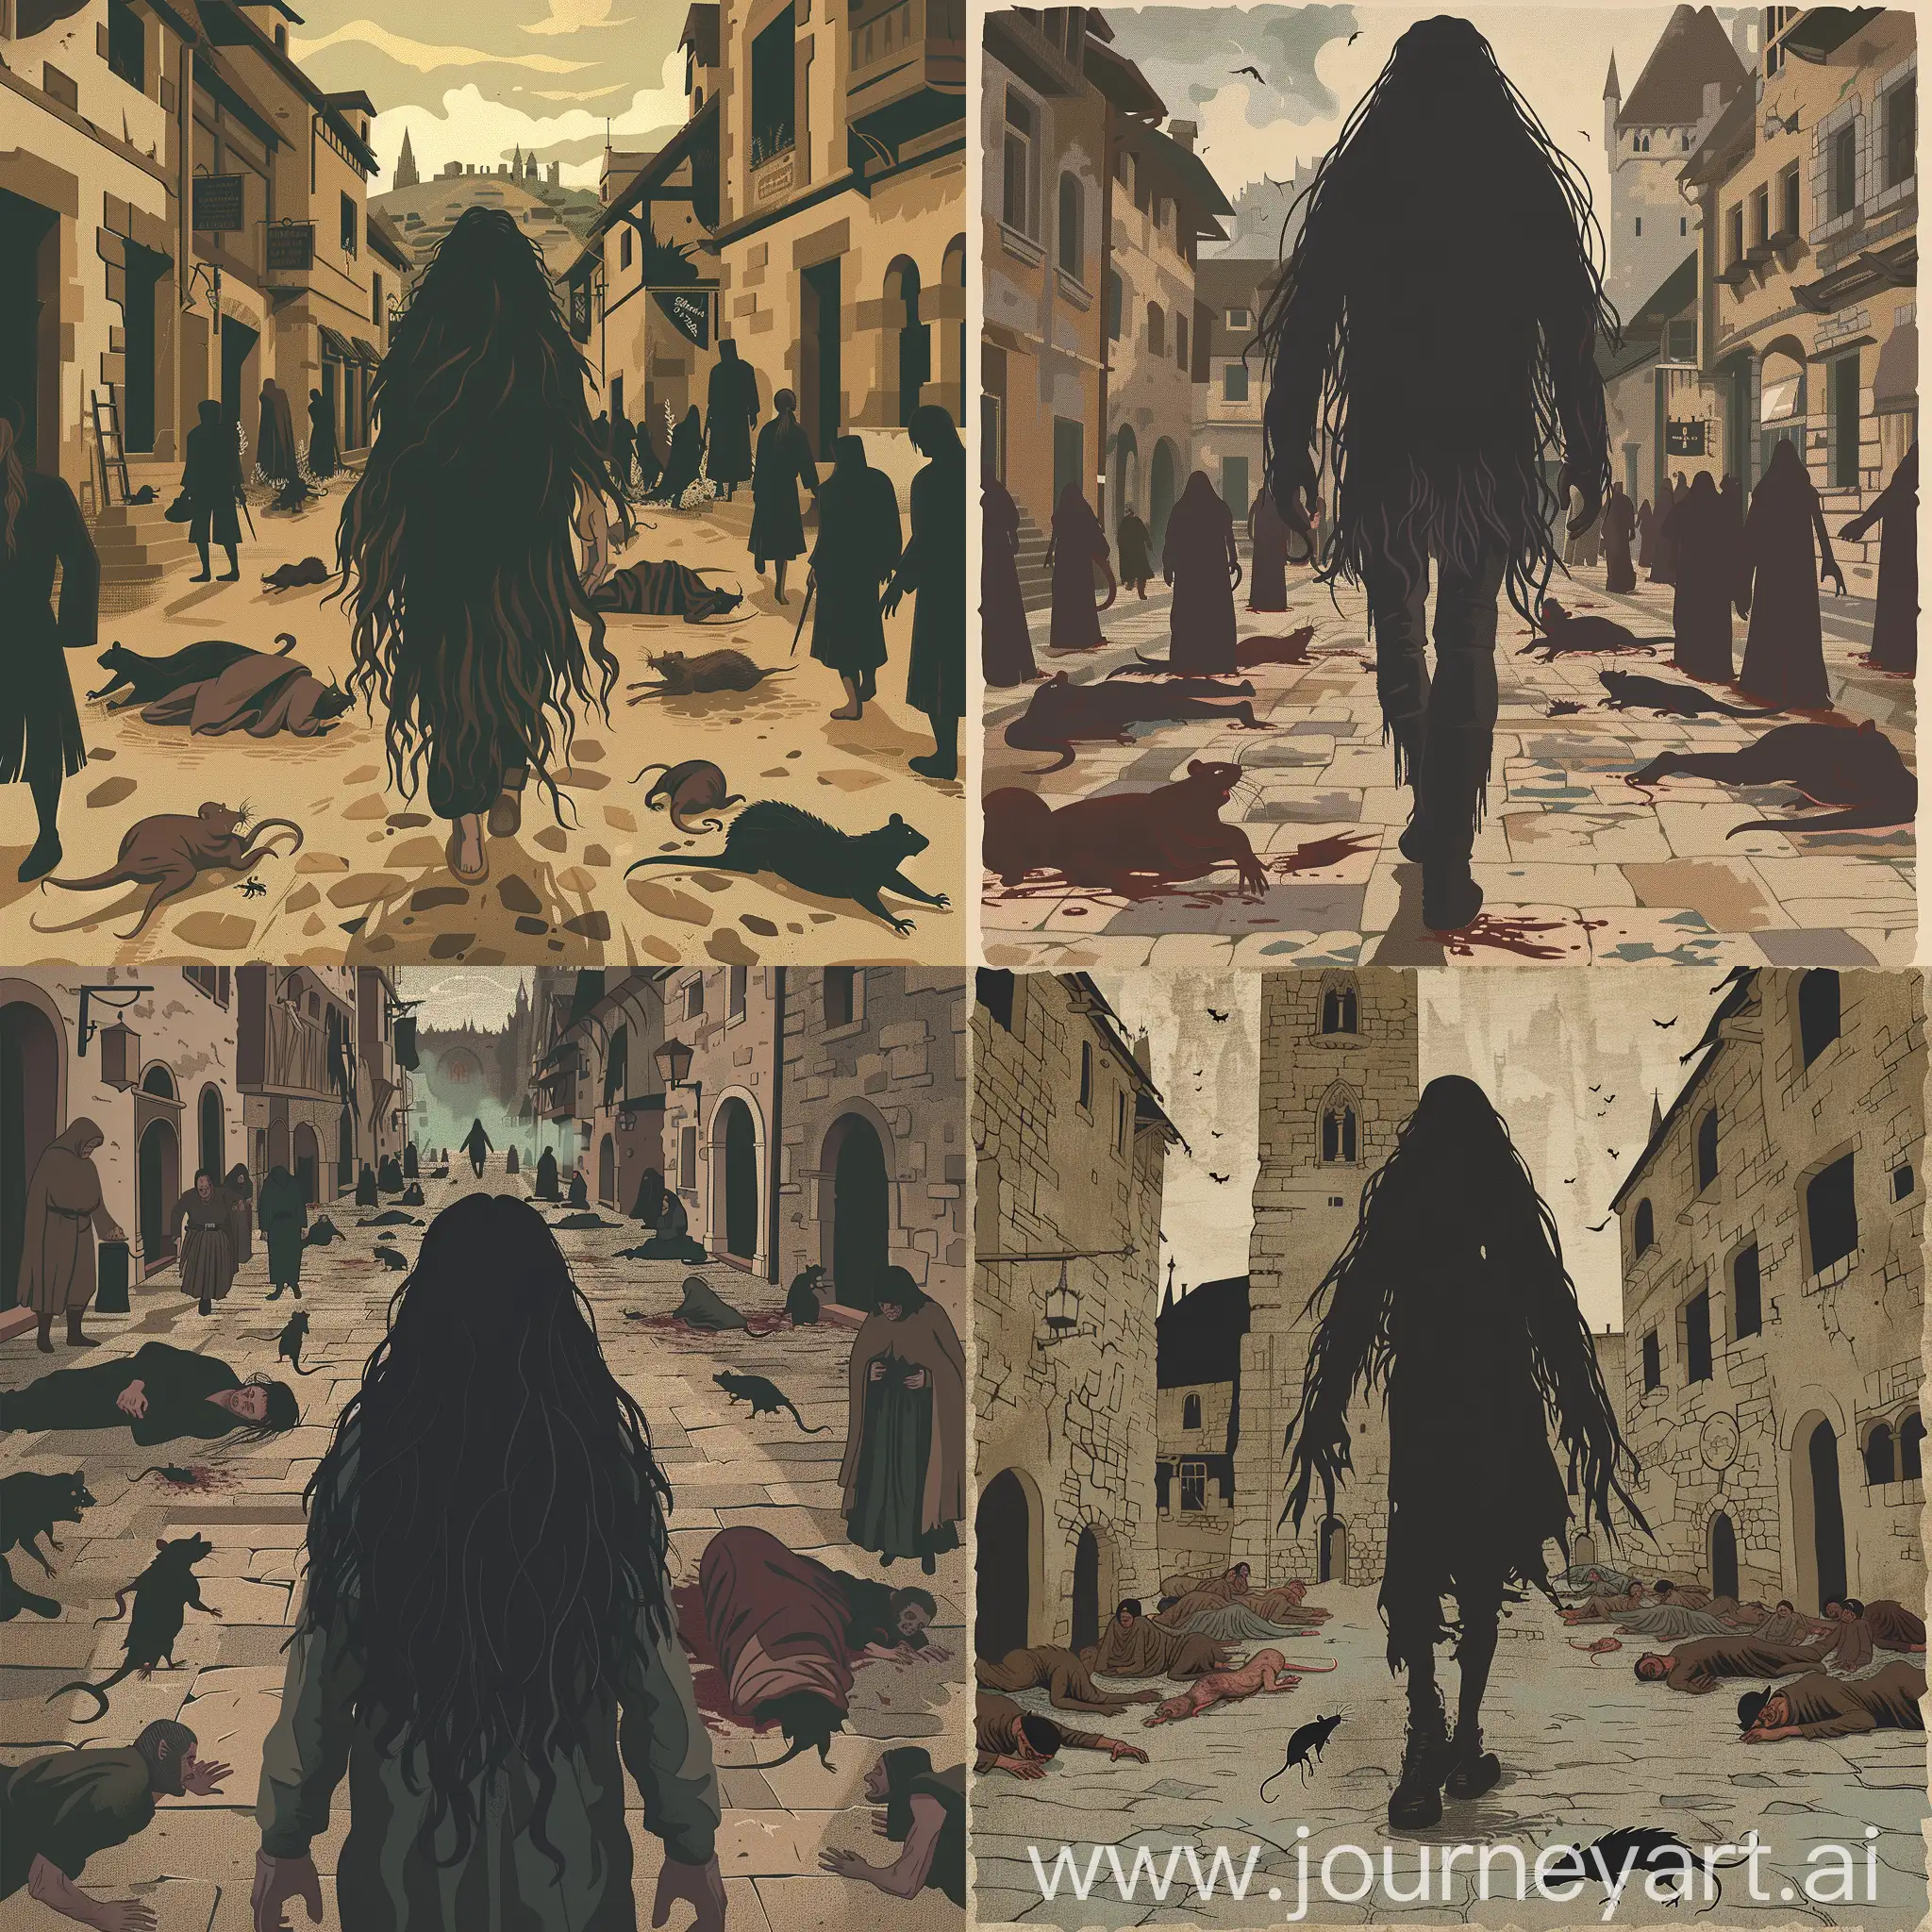 minimalistic illustration in swampy shades. stately man with black long hair in the center, he can be seen from head to toe, the man is walking through a medieval town, sick townspeople are lying around, rats are running along the sidewalk. depressing atmosphere